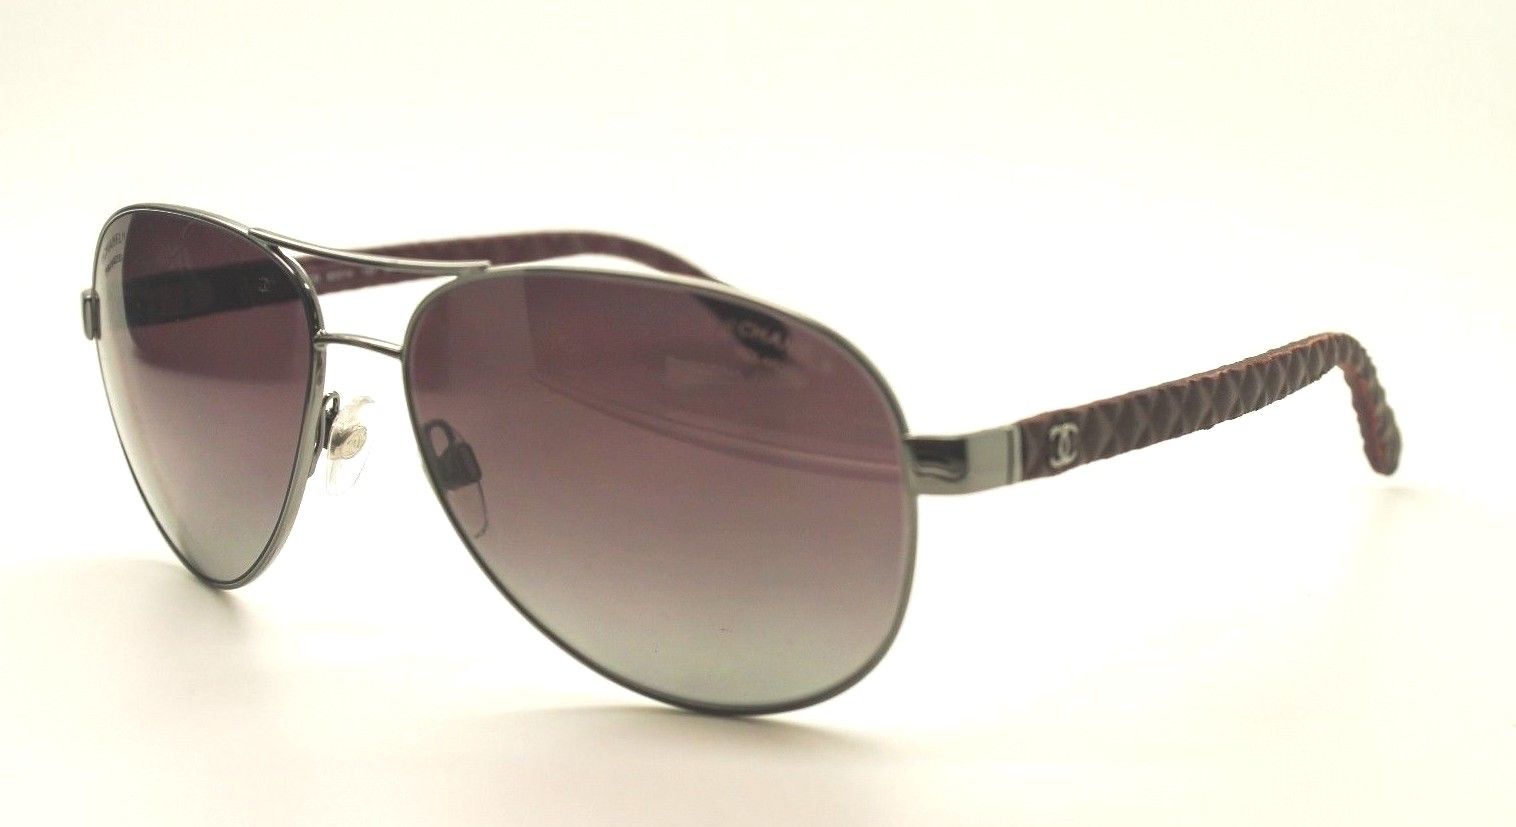 NEW CHANEL CH 5271 c.622/T6 58mm Black and Gold Mirror Sunglasses Italy  £228.39 - PicClick UK